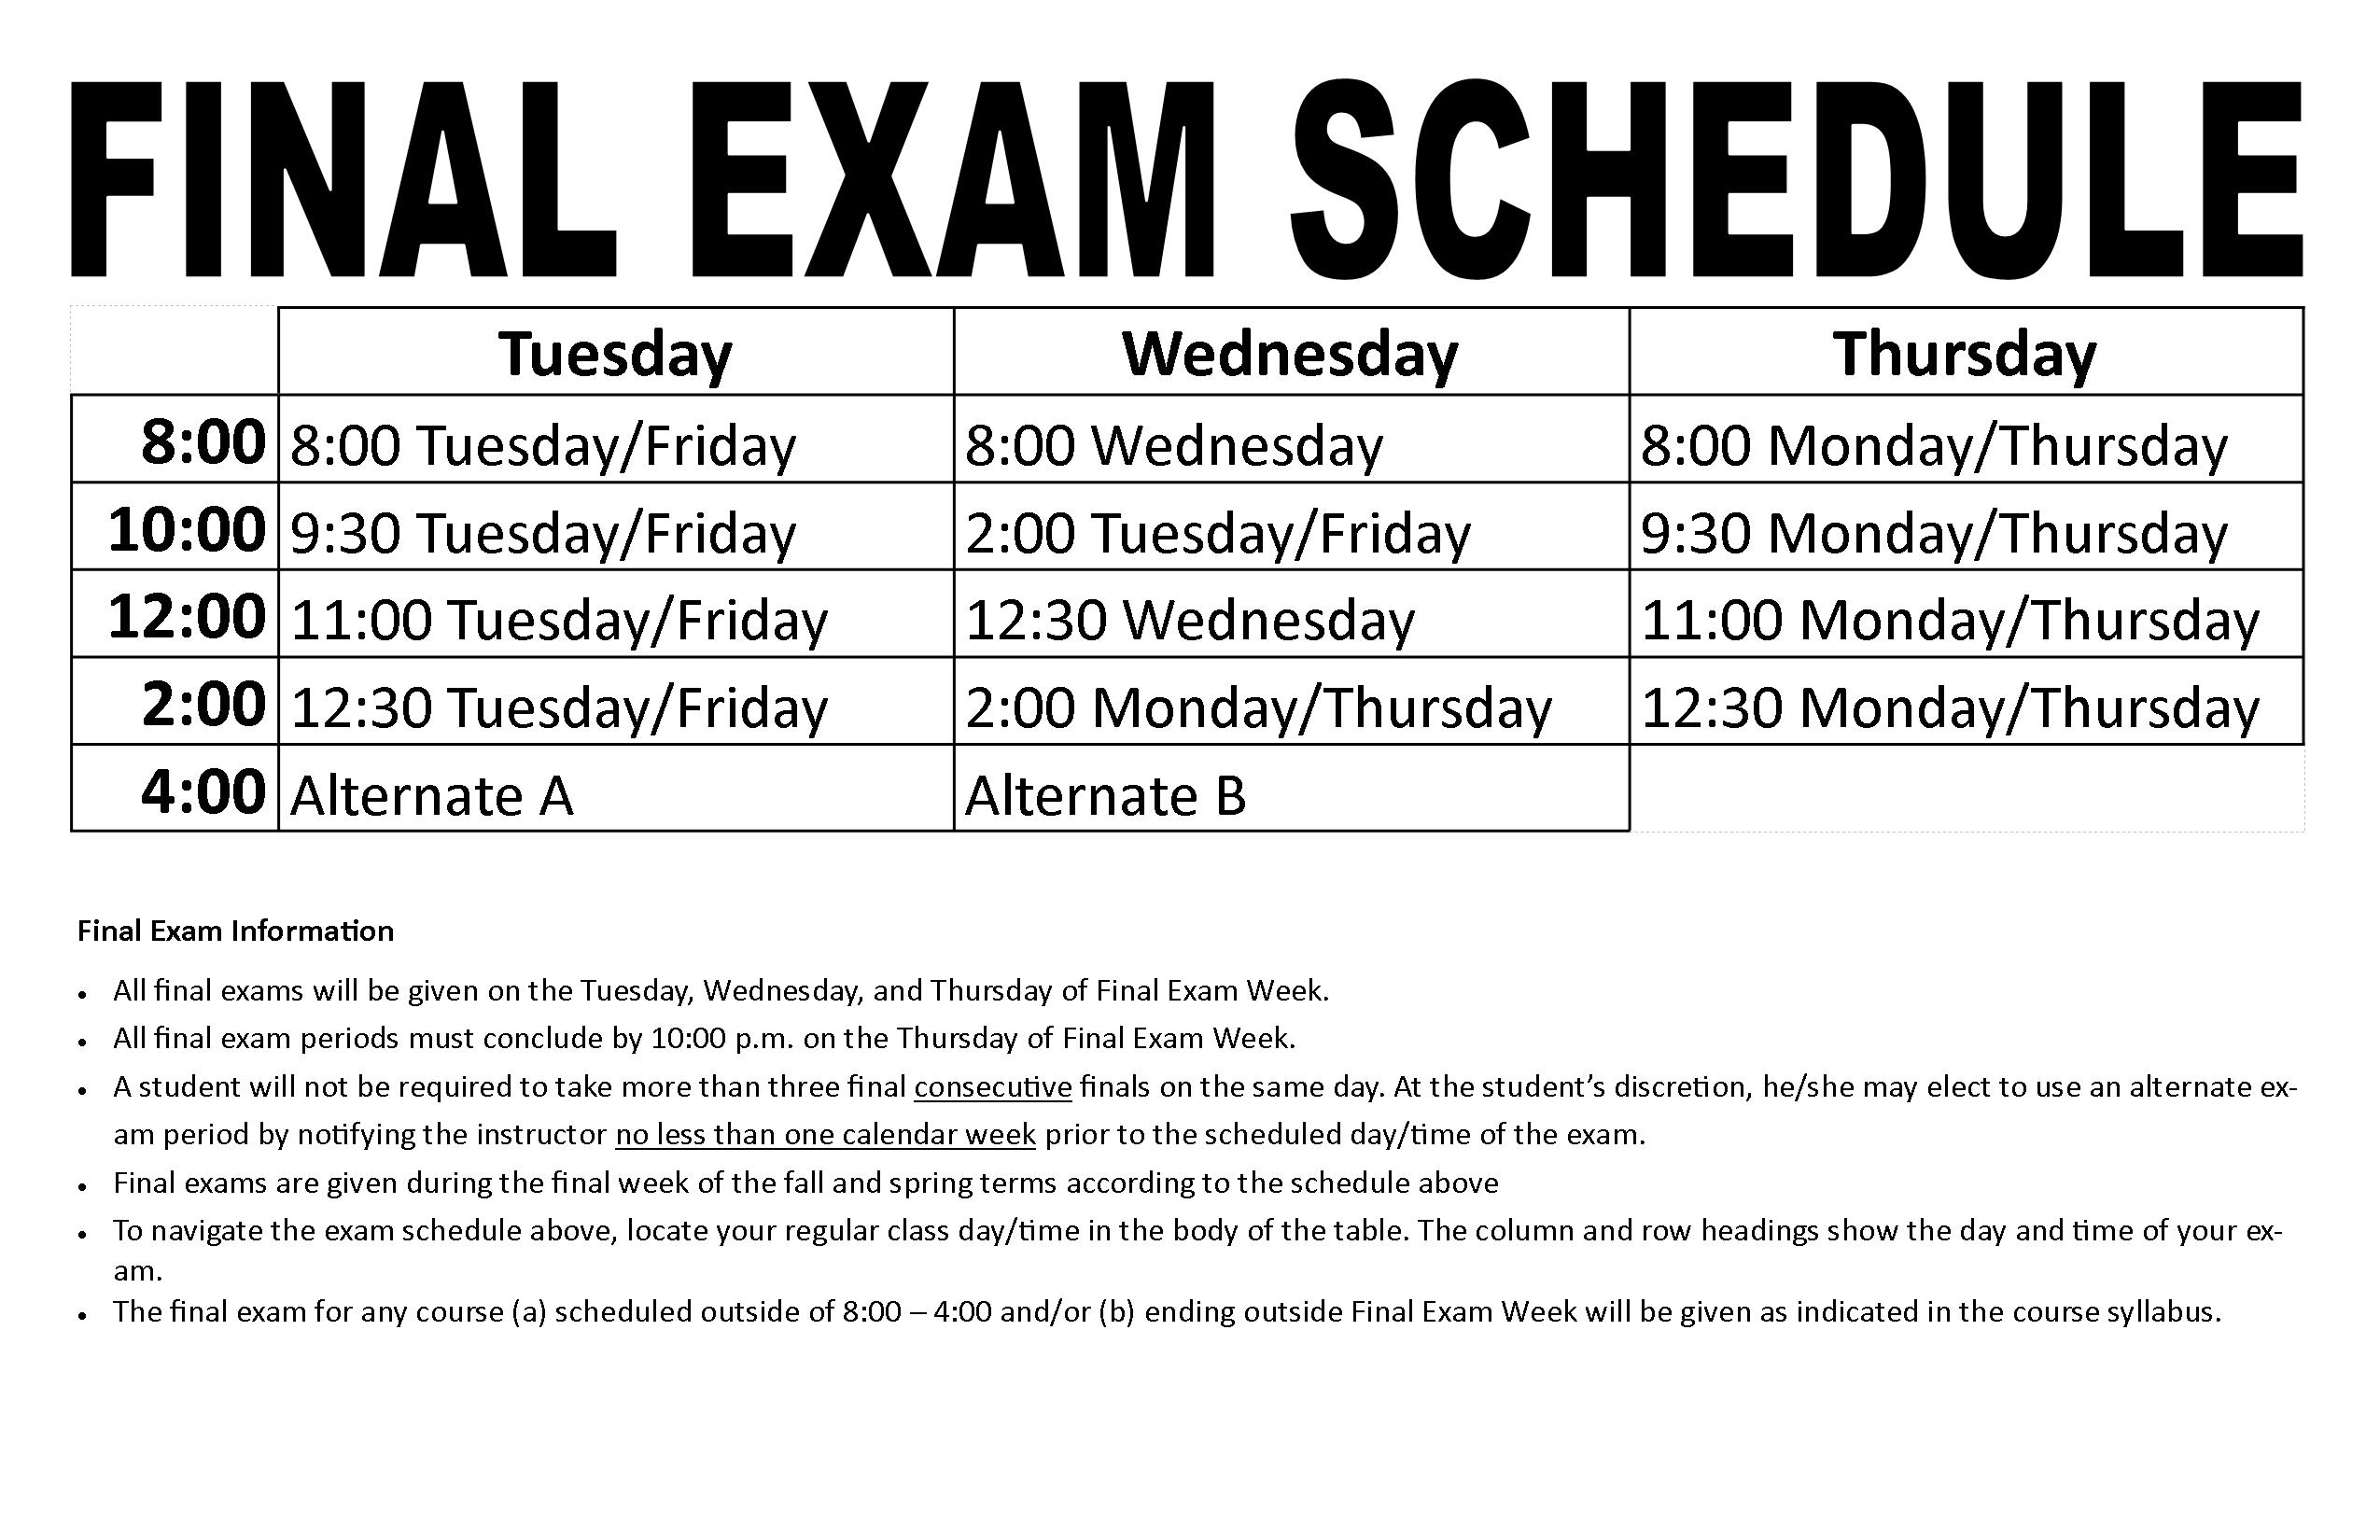 Iium Final Exam Schedule - Exams will take place thursday, may 7